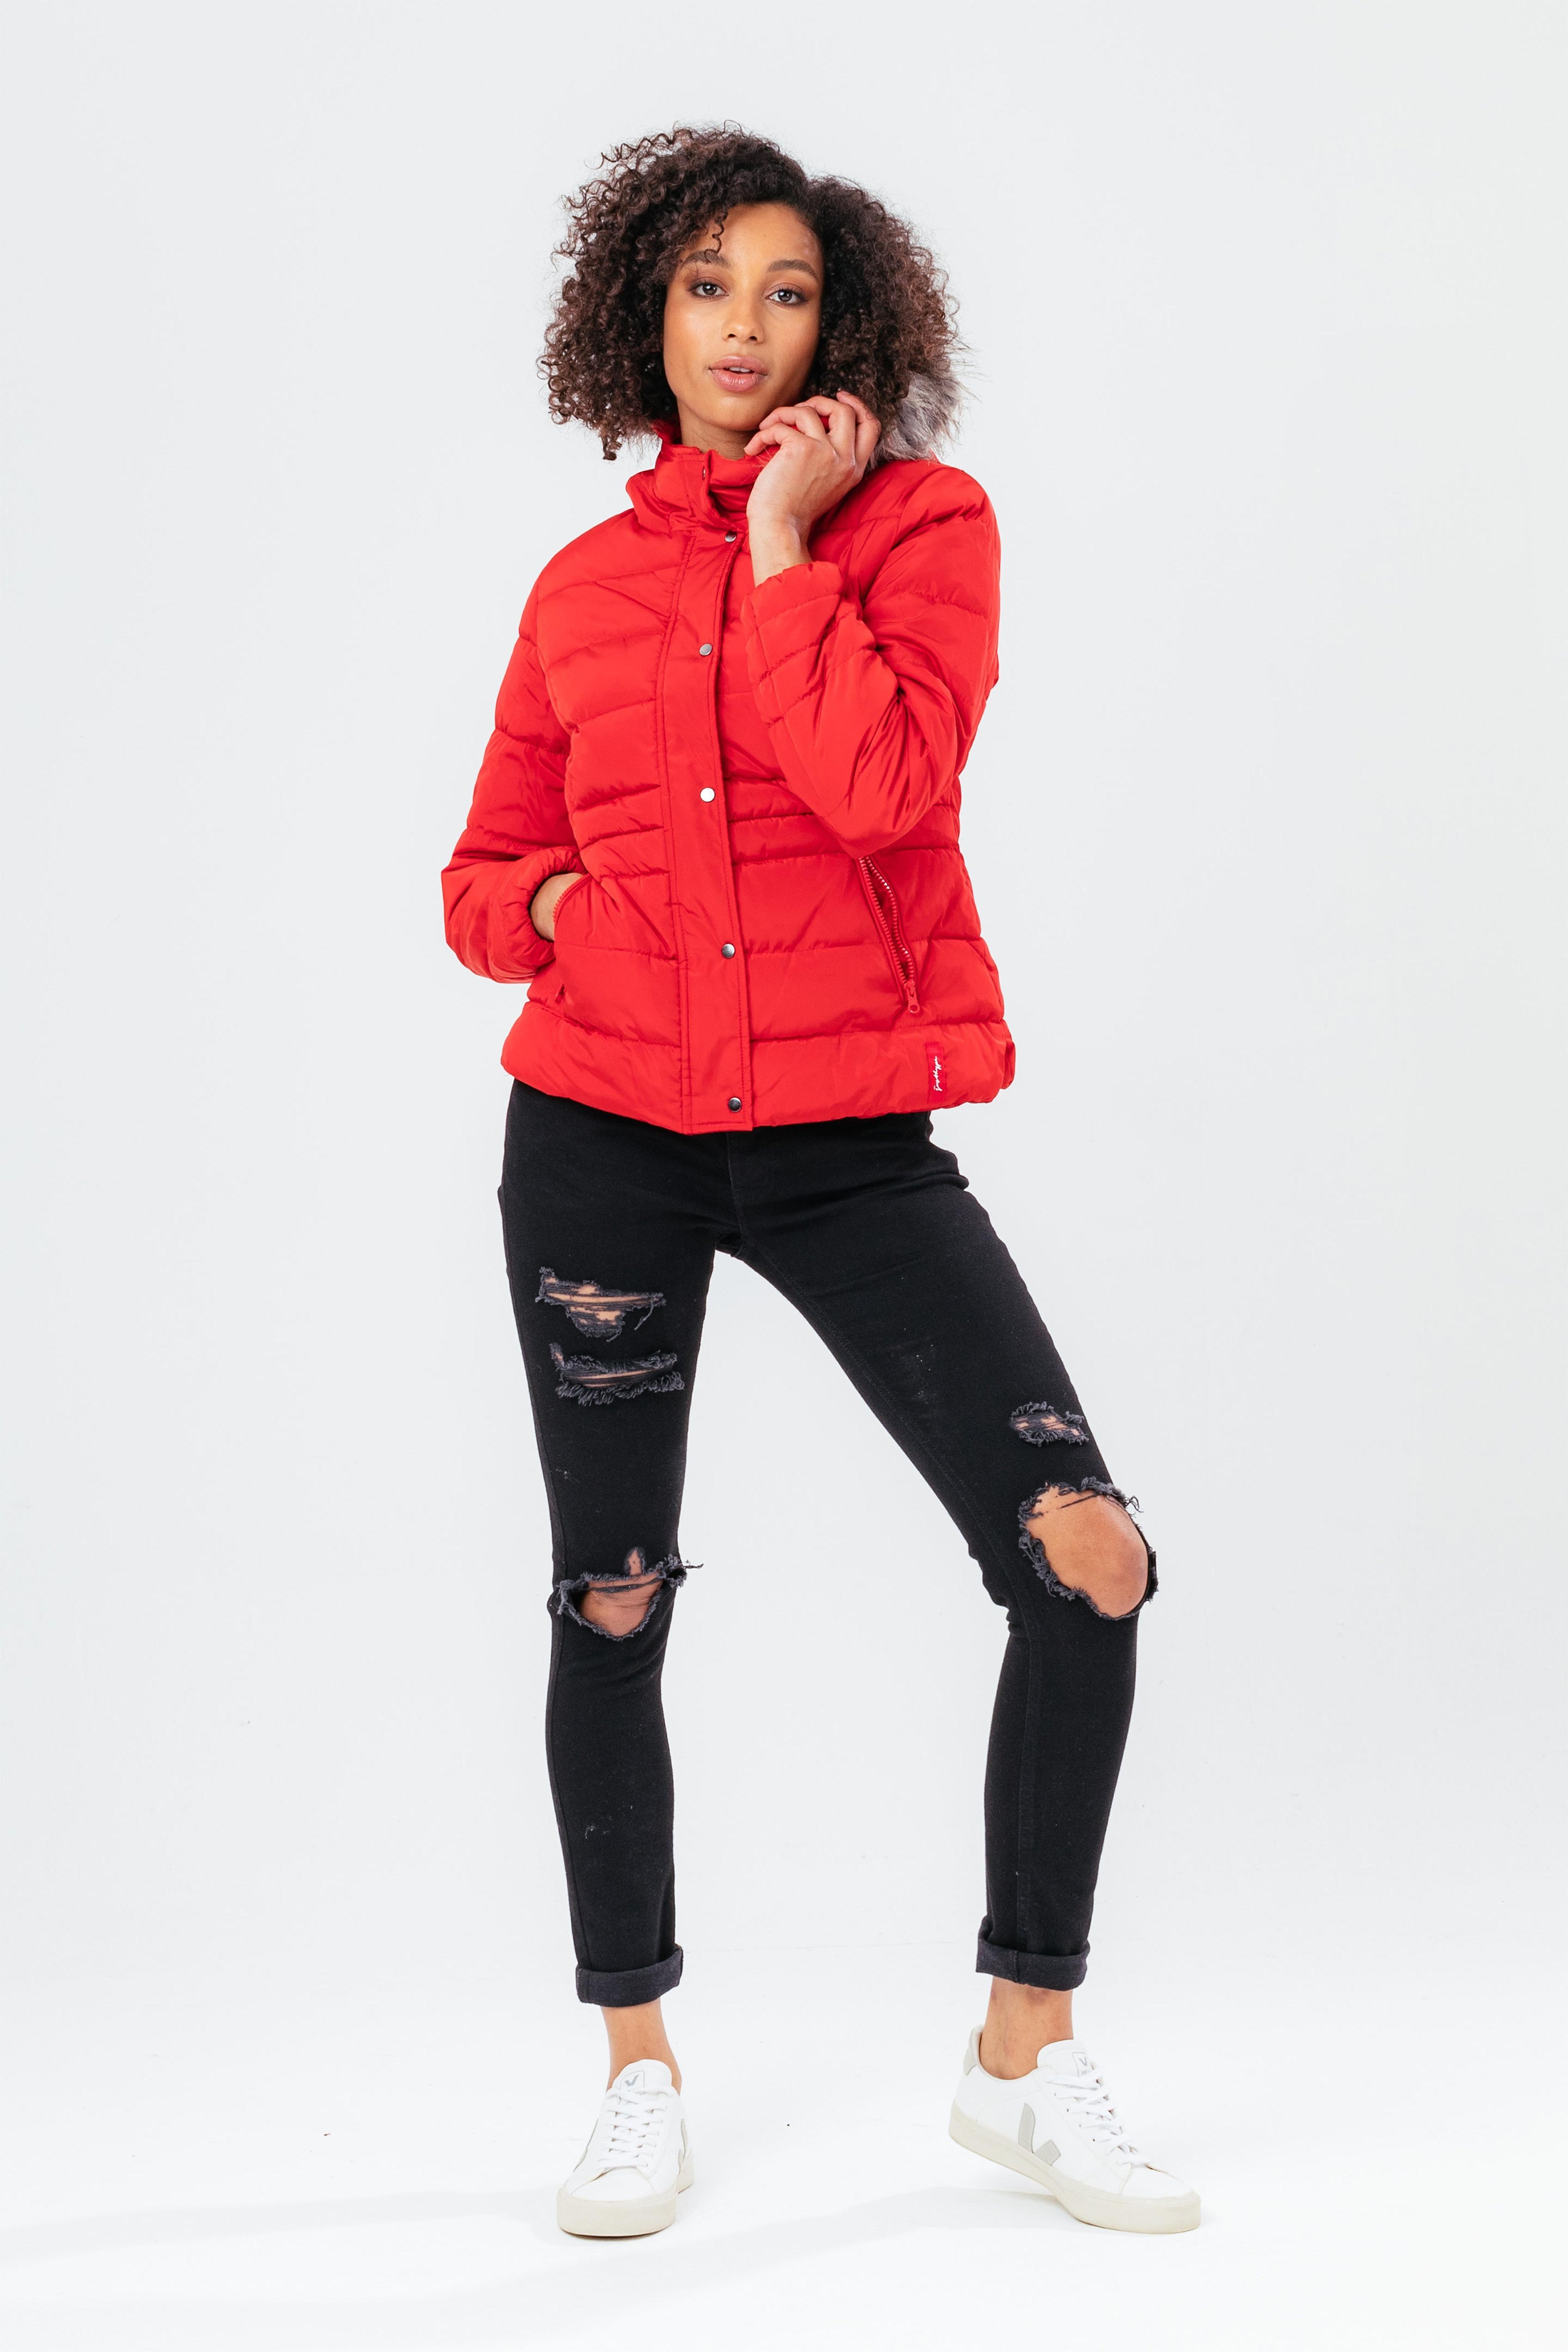 Alternate View 1 of HYPE RED SHORT LENGTH WOMEN'S PADDED COAT WITH FUR